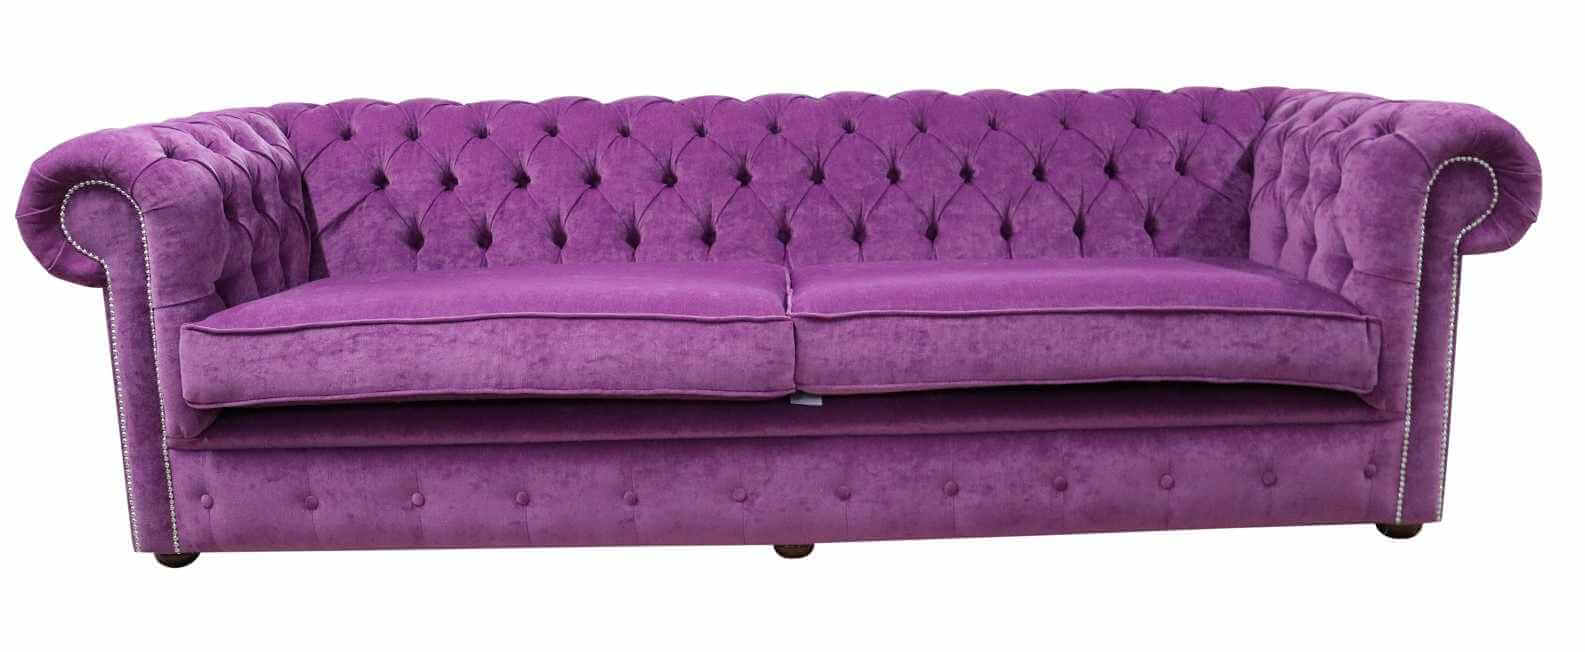 Assessing Chesterfield Sofas Quality, Comfort, and Style  %Post Title